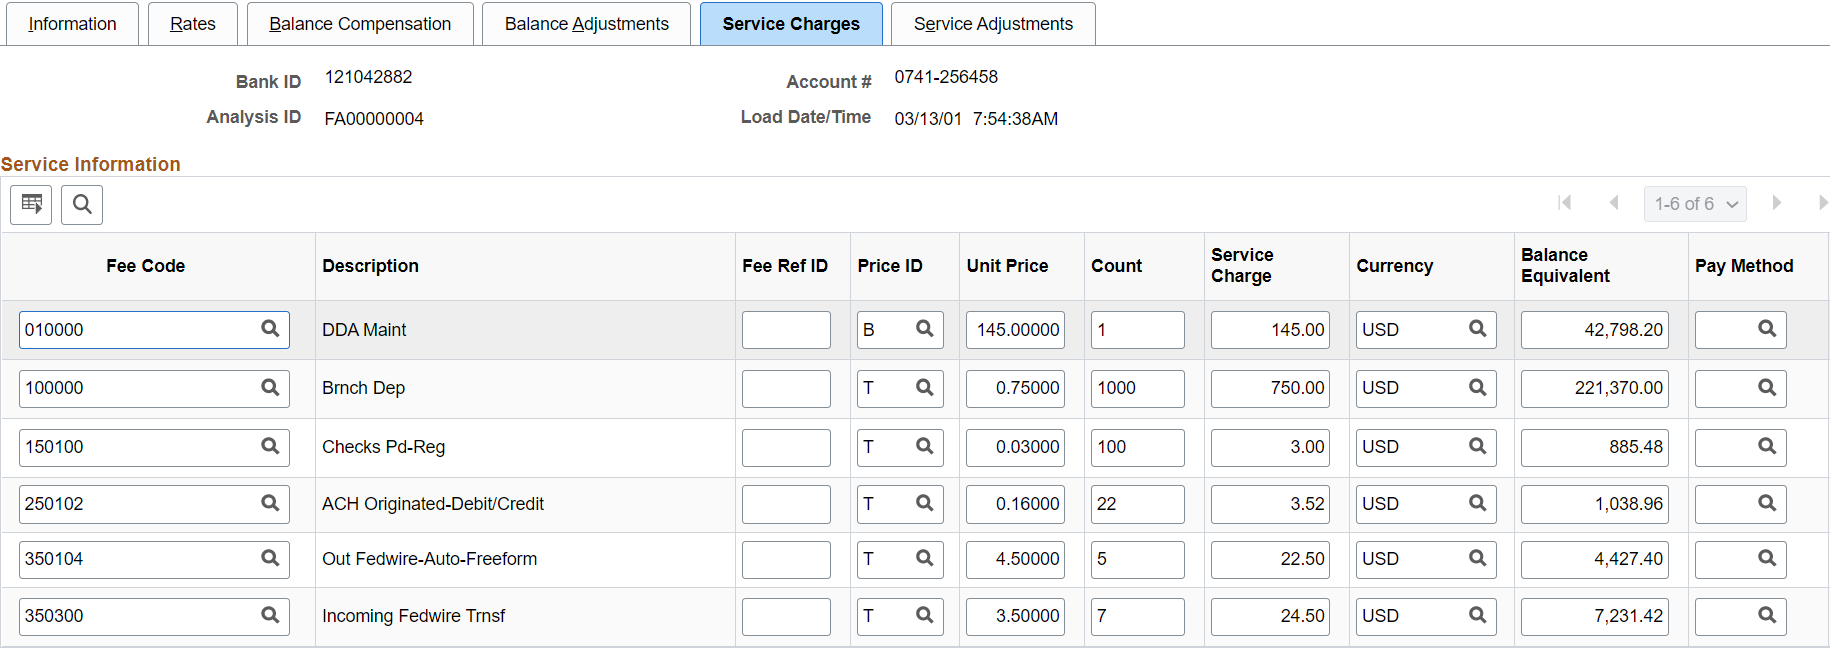 Fee Statements - Service Charges page